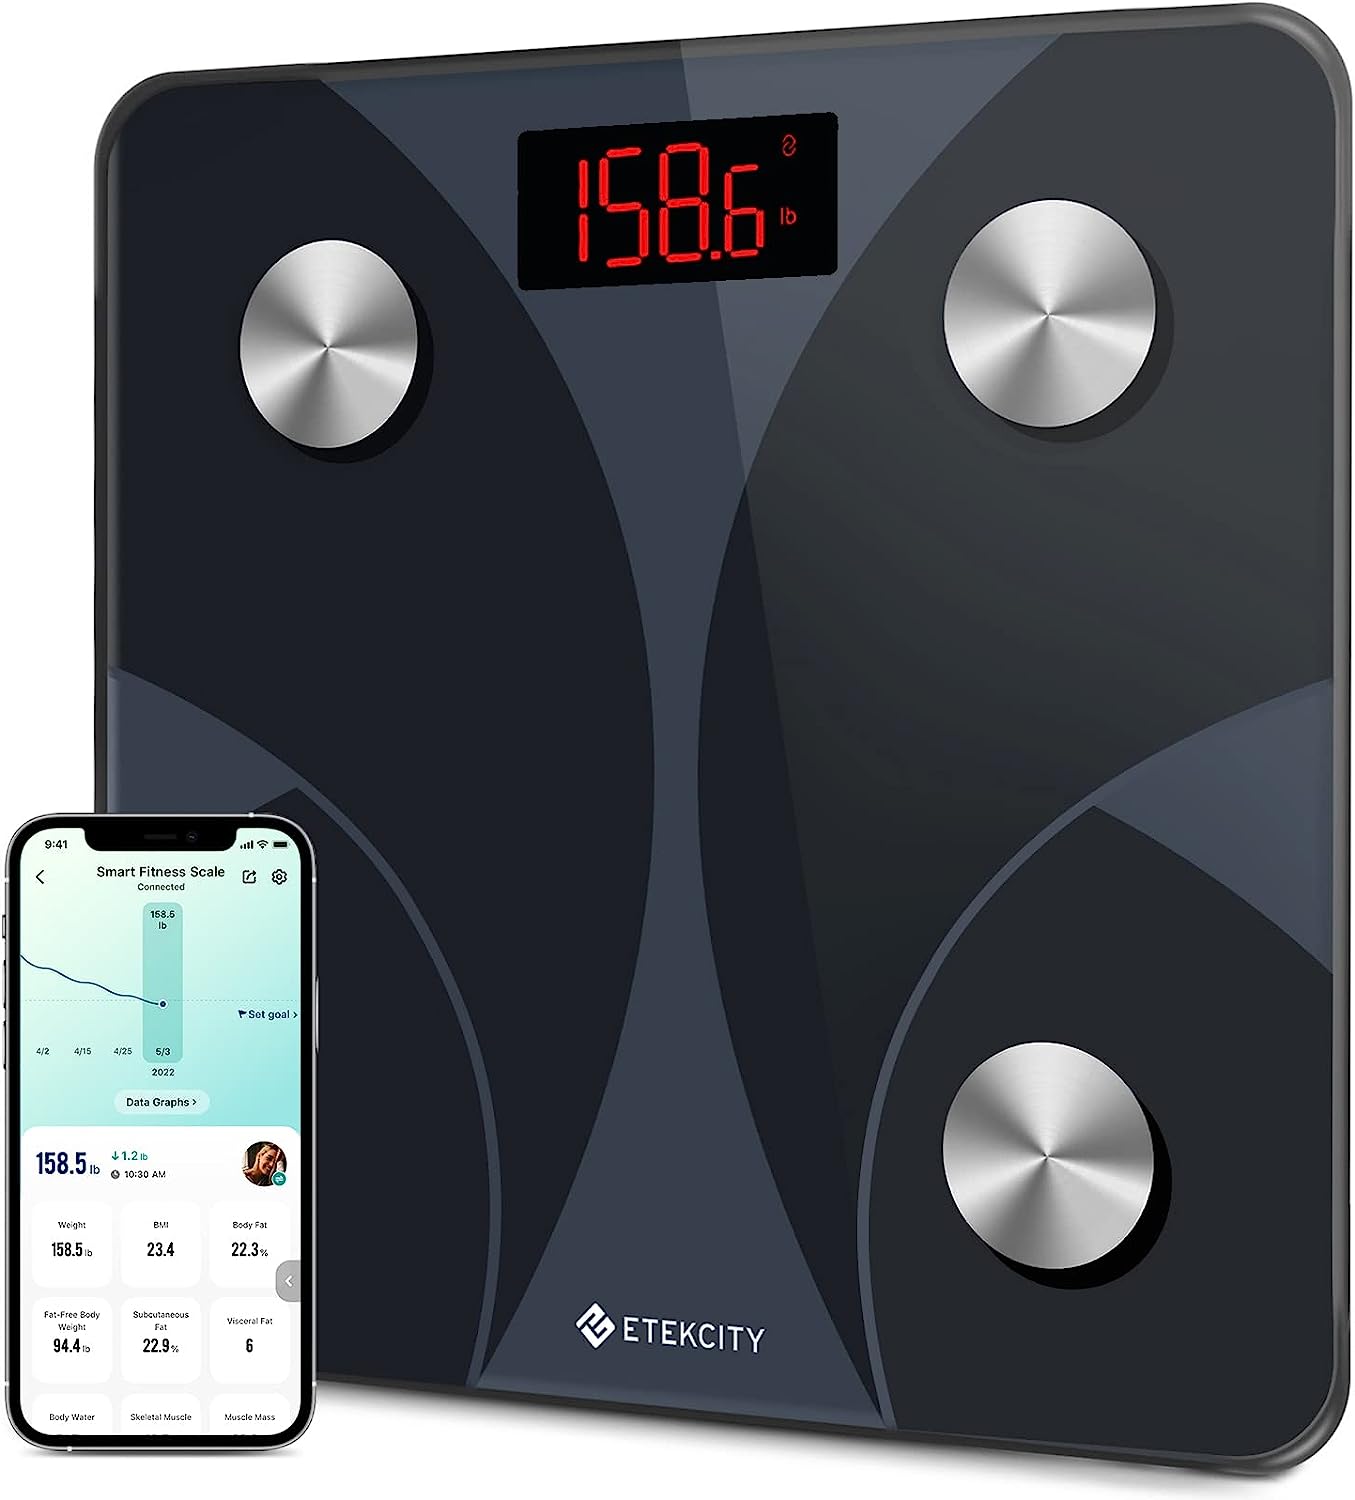 Etekcity Scale for Body Weight and Fat Percentage